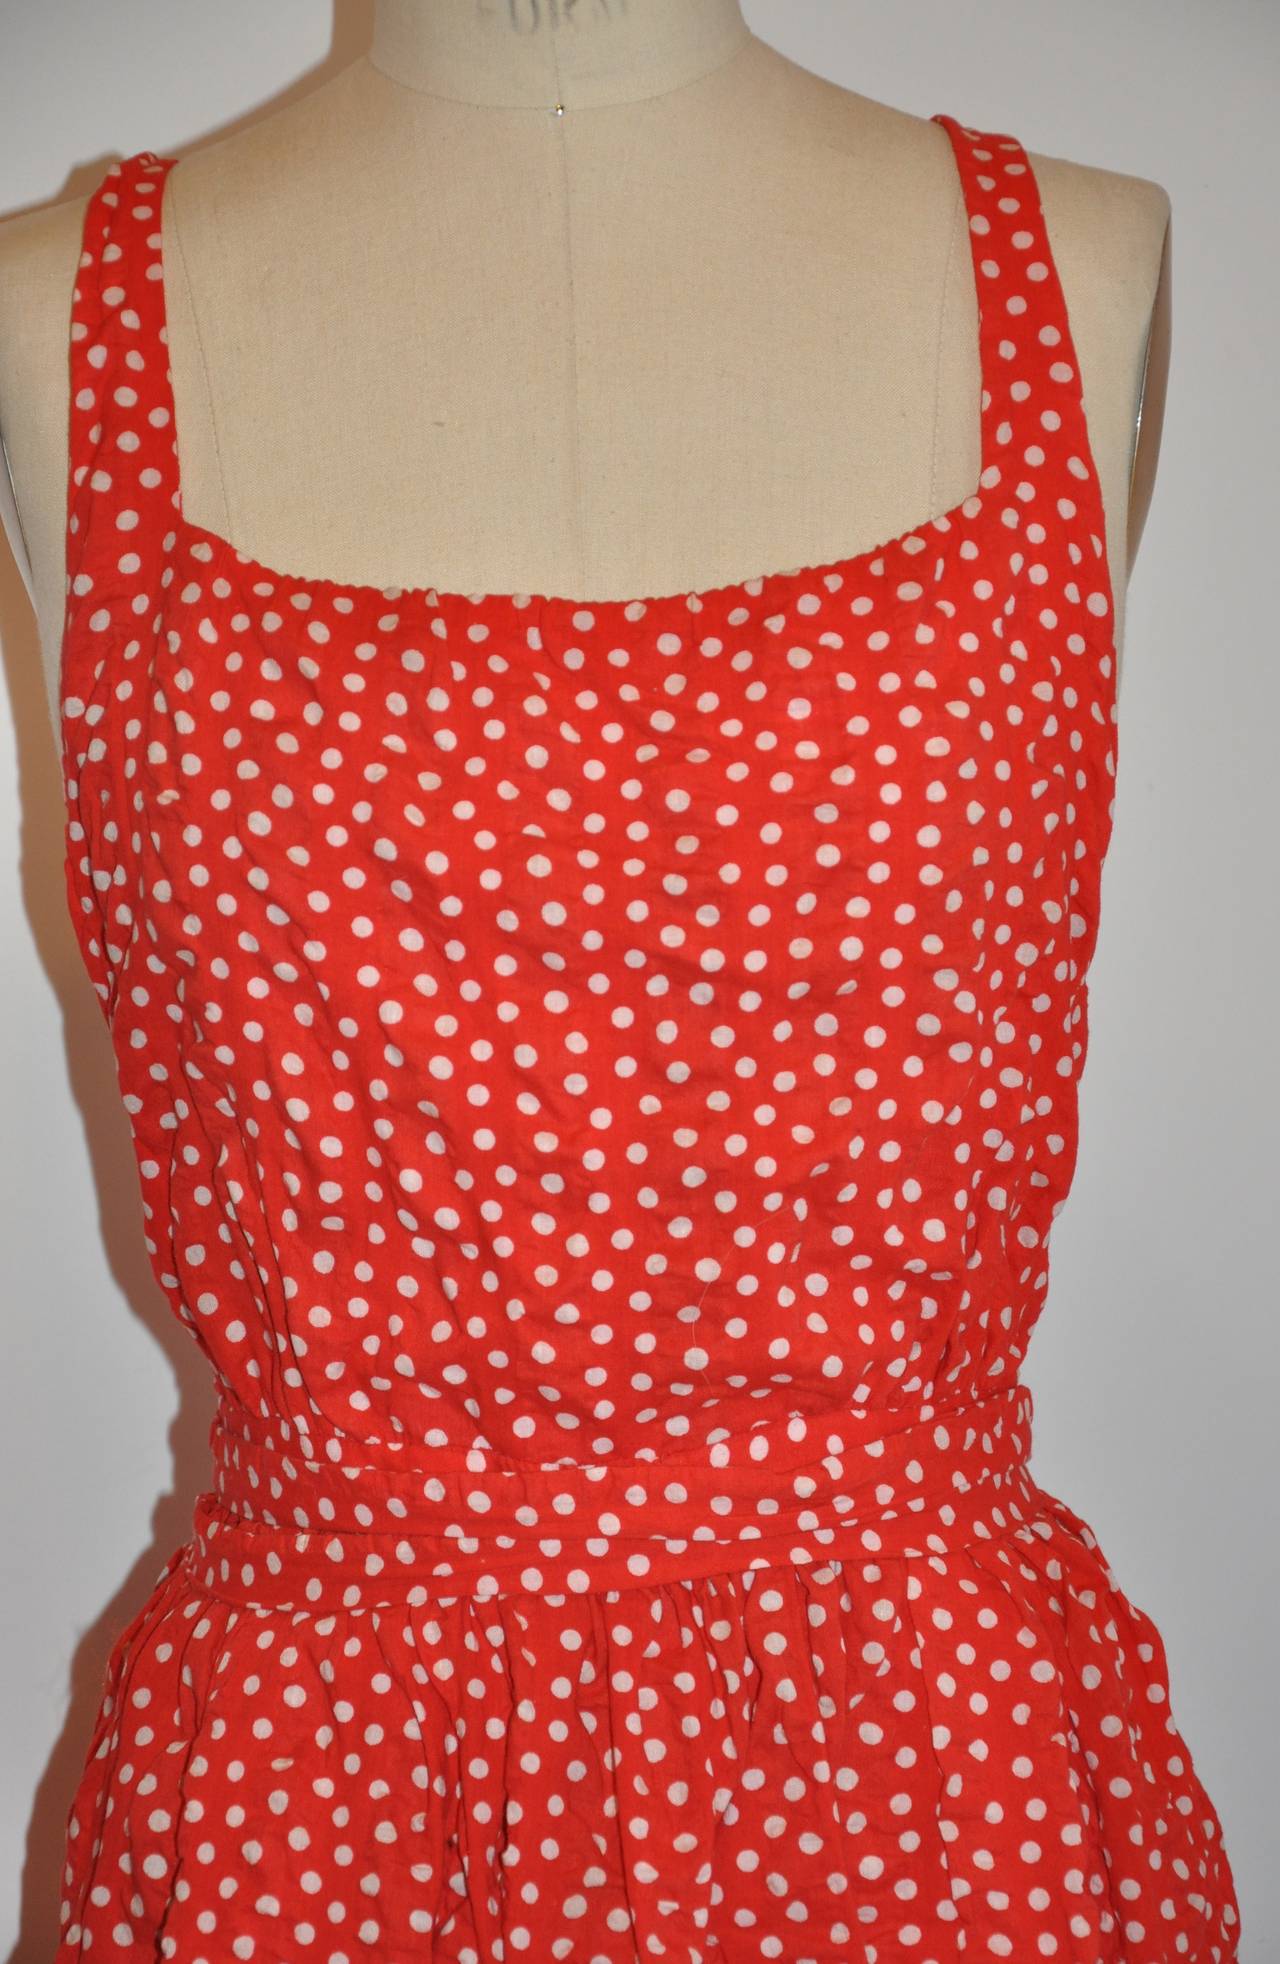 Halston's wonderfully bold red polka-dot halter dress made of sheersucker cotton is simply perfect for those warm summer days. The sheersucker cotton dries in literally seconds, so you would be cool in those hot summer days.
   The back has a